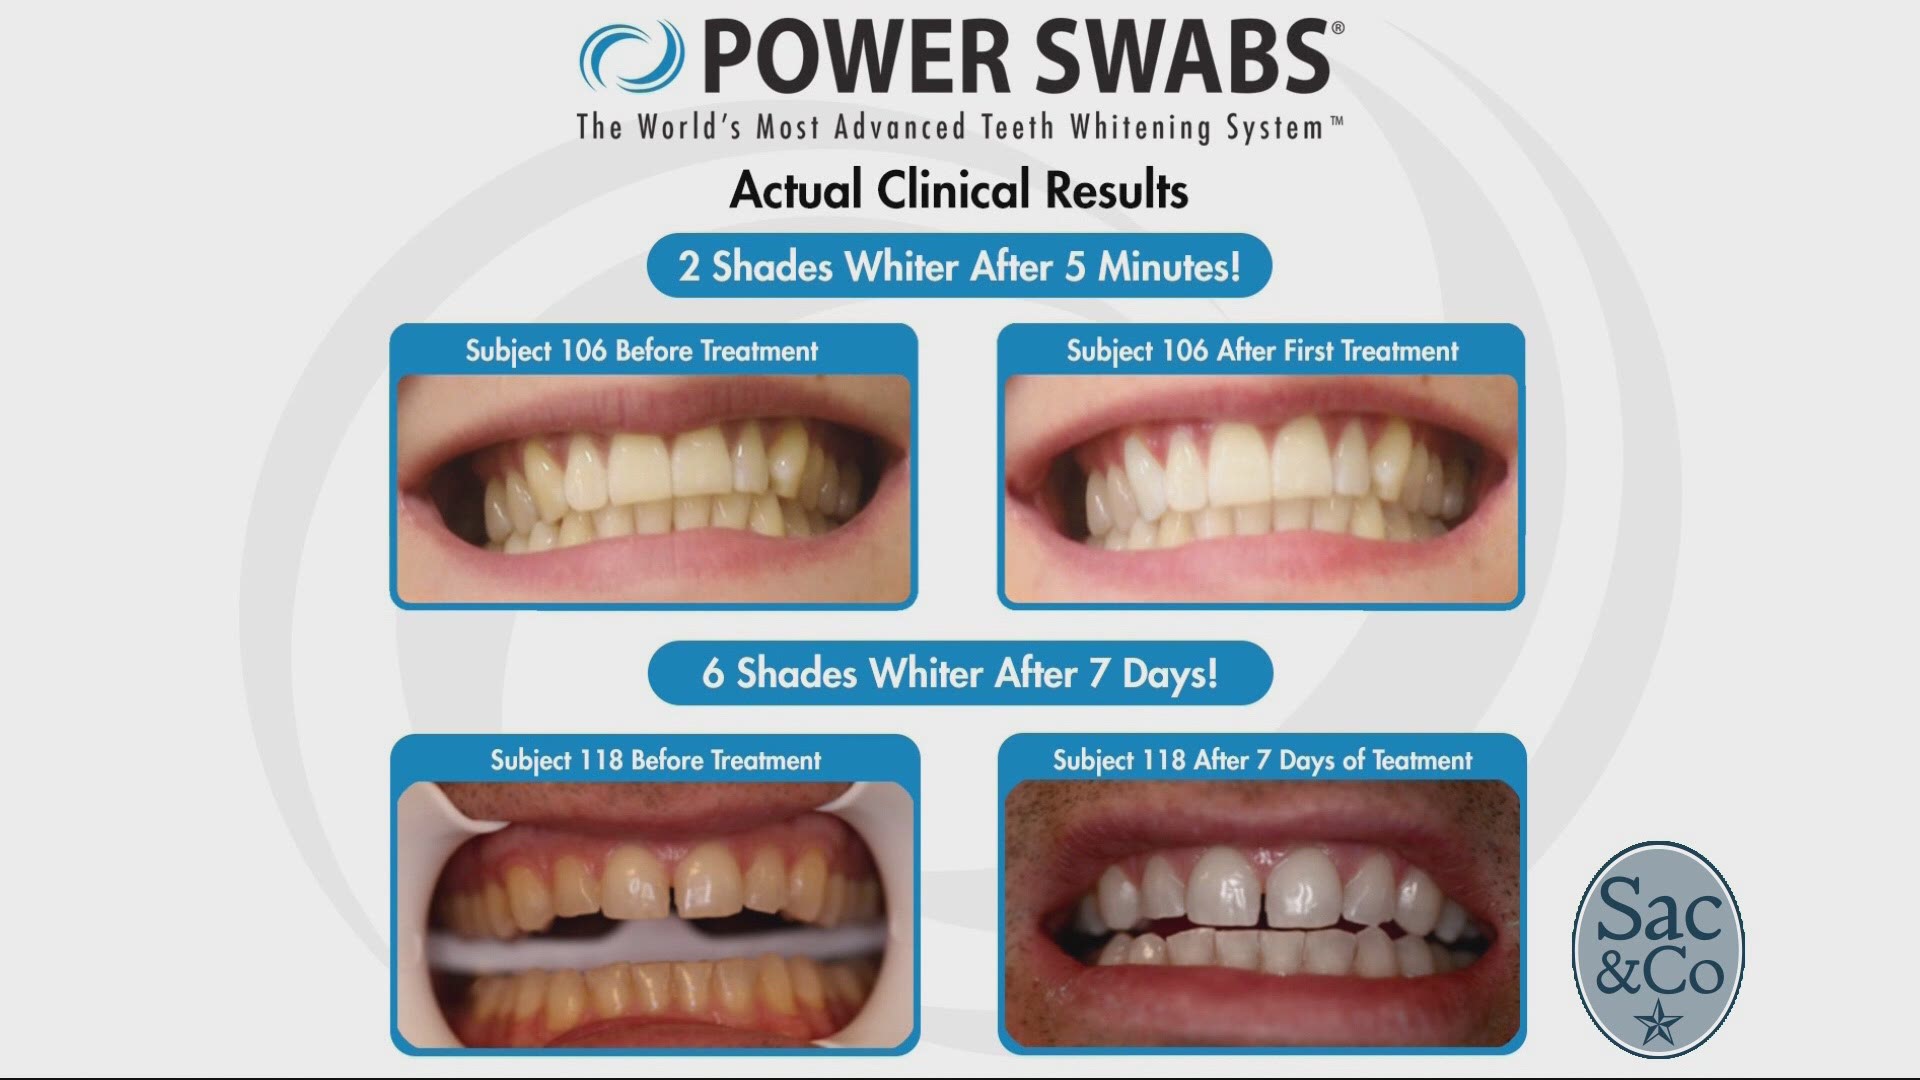 Find out the secret to a visibly whiter smile without sensitivity or discomfort with Power Swabs! The following is a paid segment sponsored by True Earth Health Solutions.